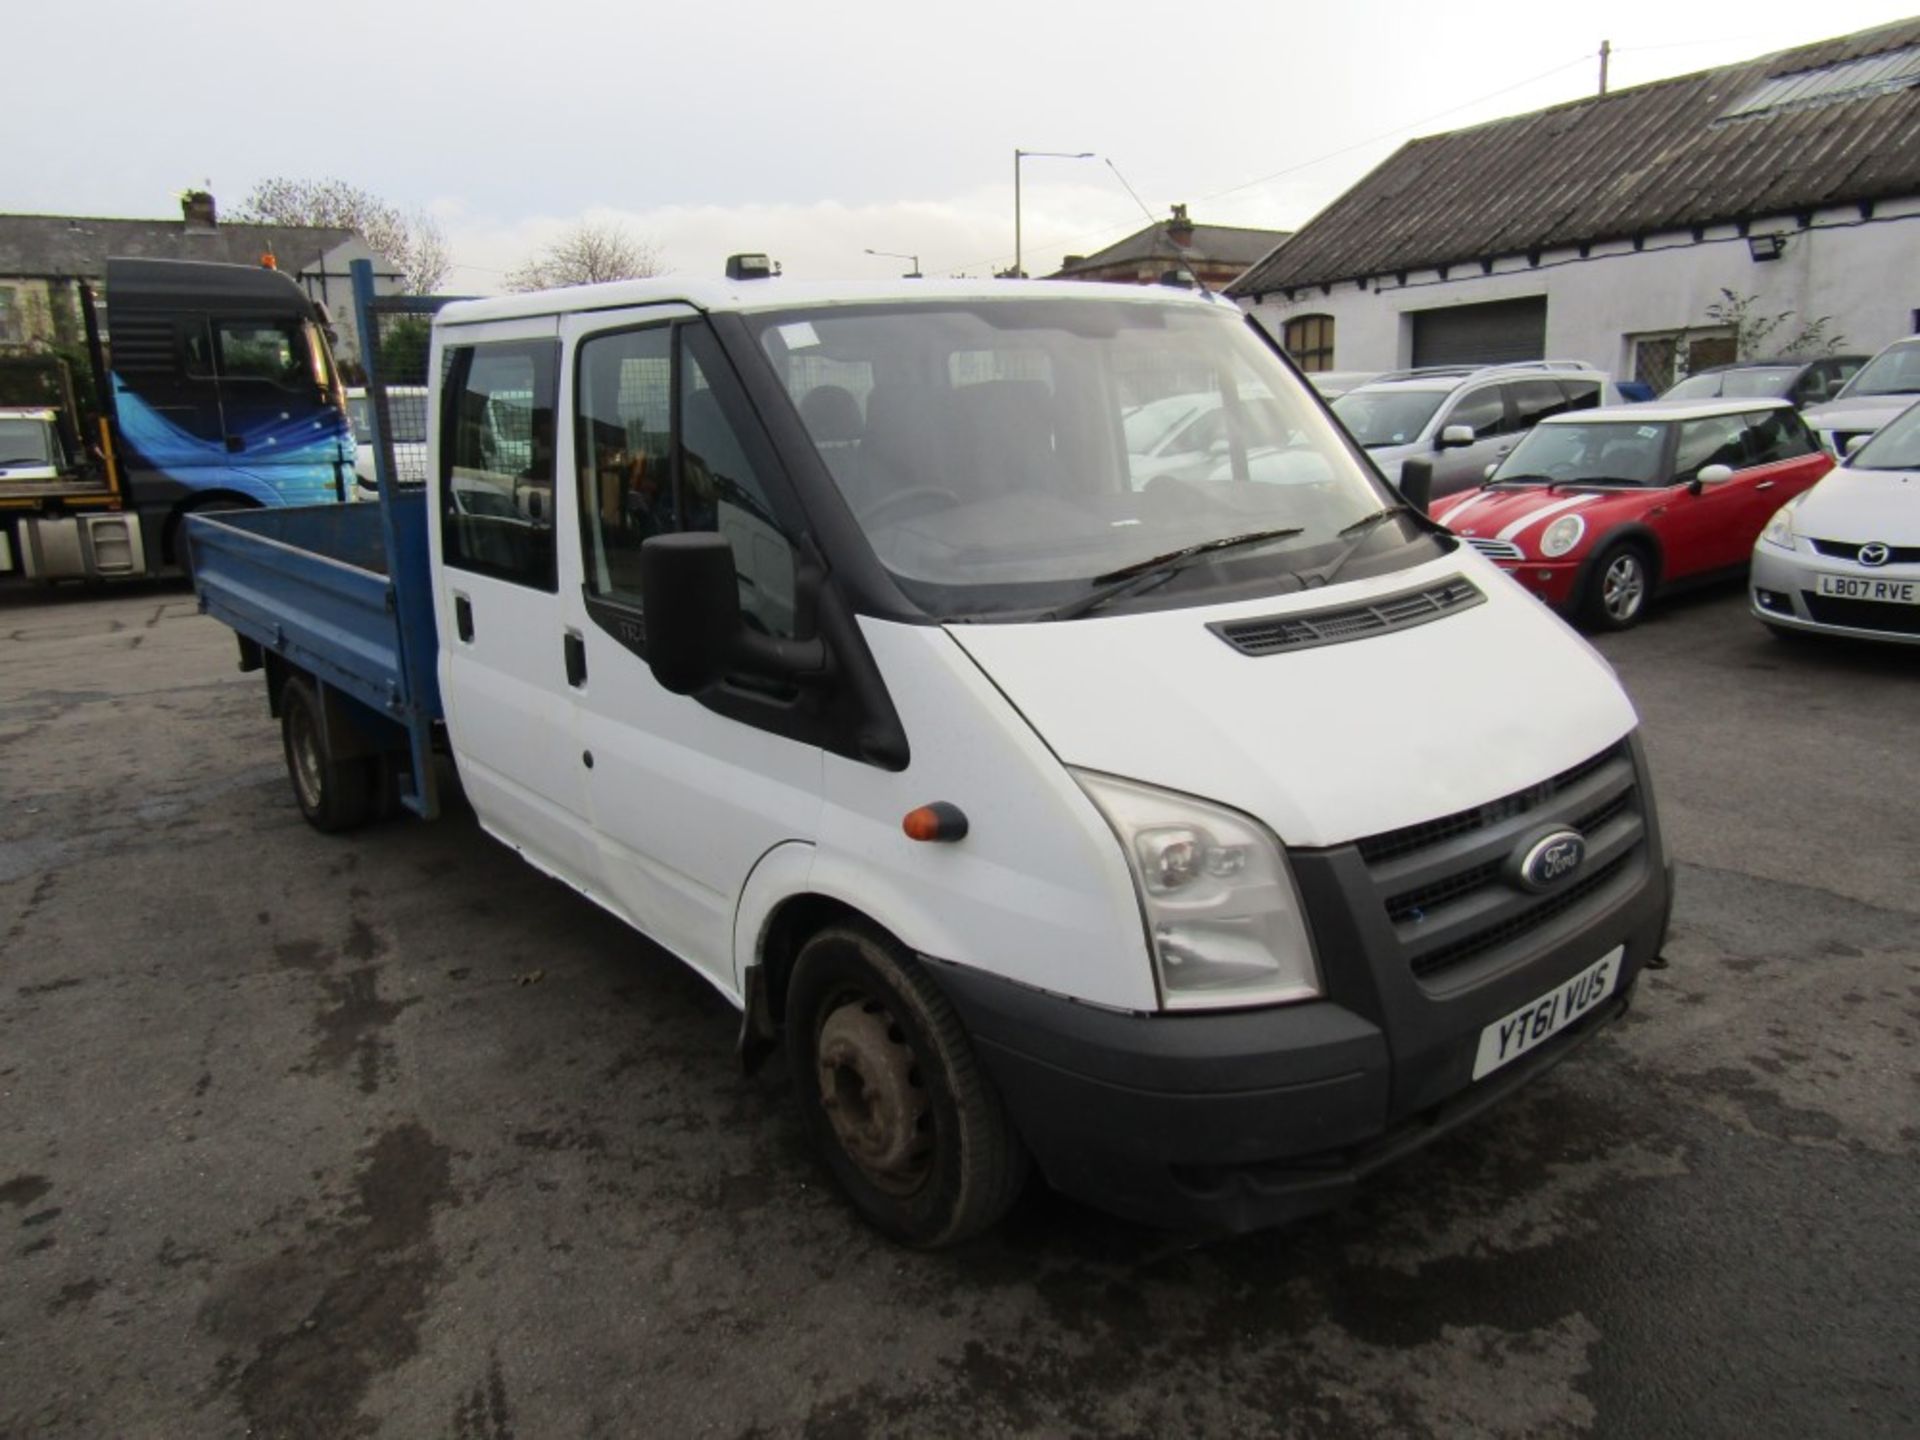 61 reg FORD TRANSIT 115 350 DOUBLE CAB DROPSIDE, NOT HAD MOT AS BEEN RUN